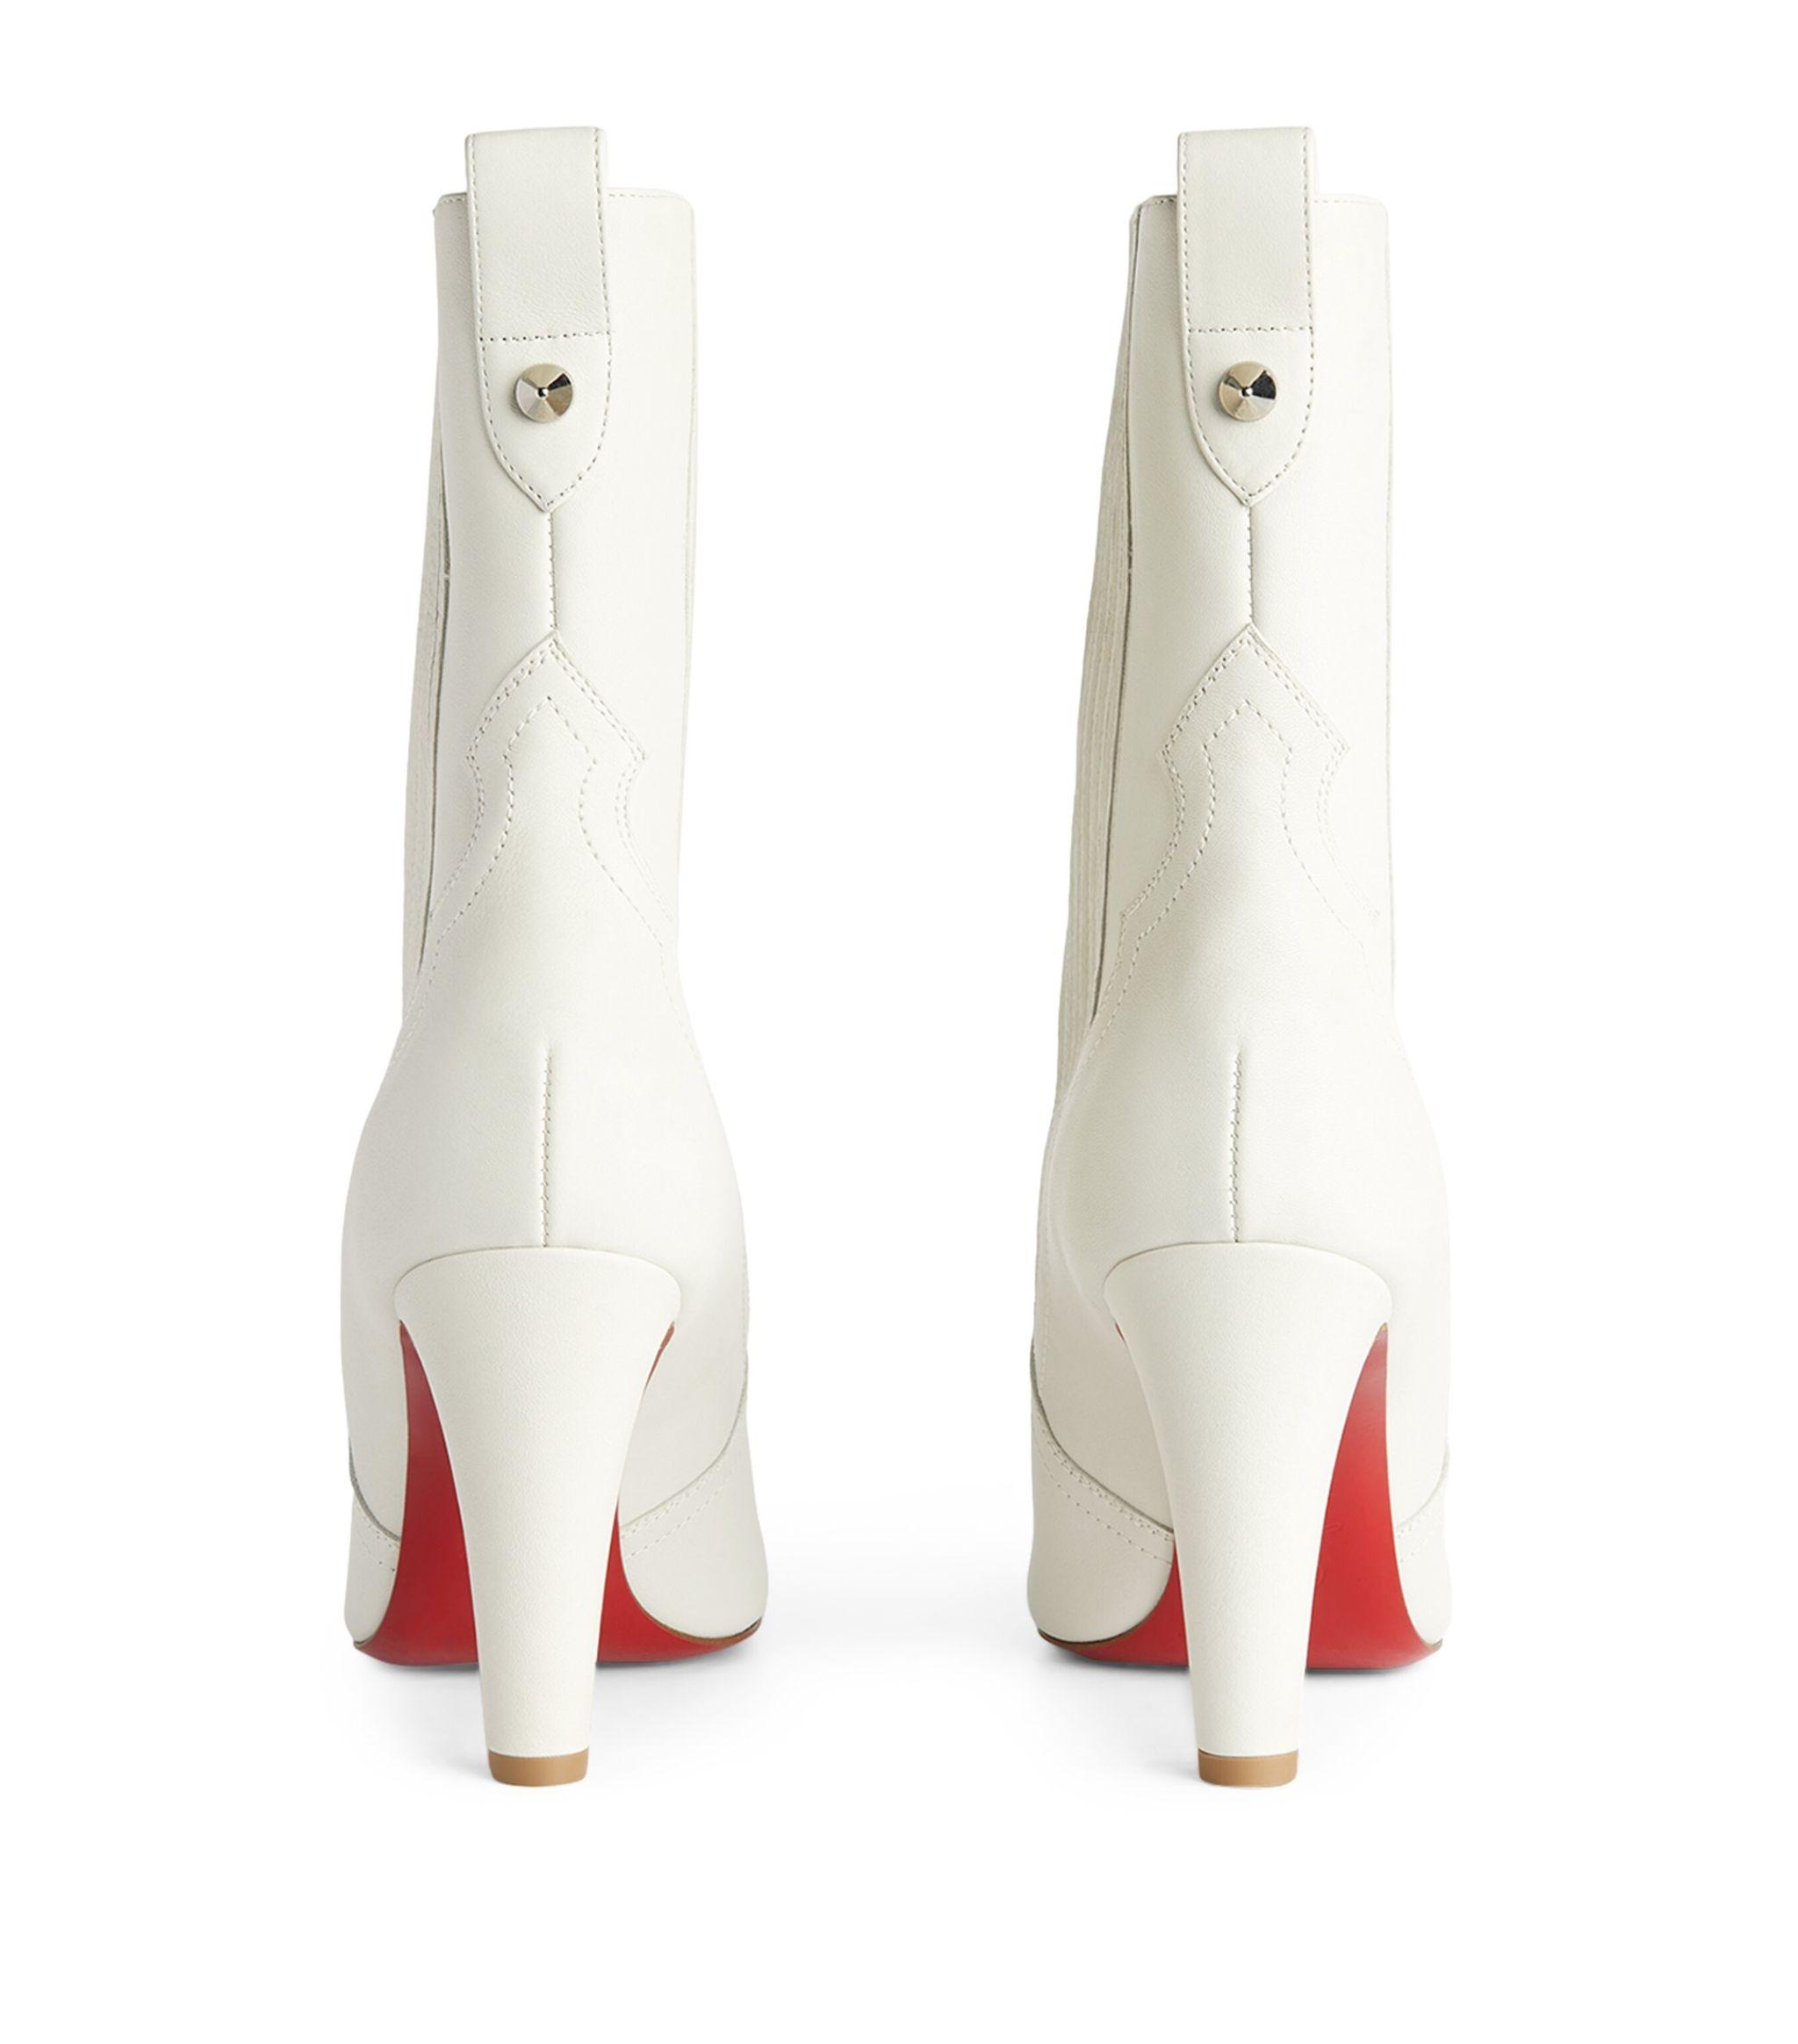 Christian Louboutin Santigag Leather Ankle Boots 85 in White